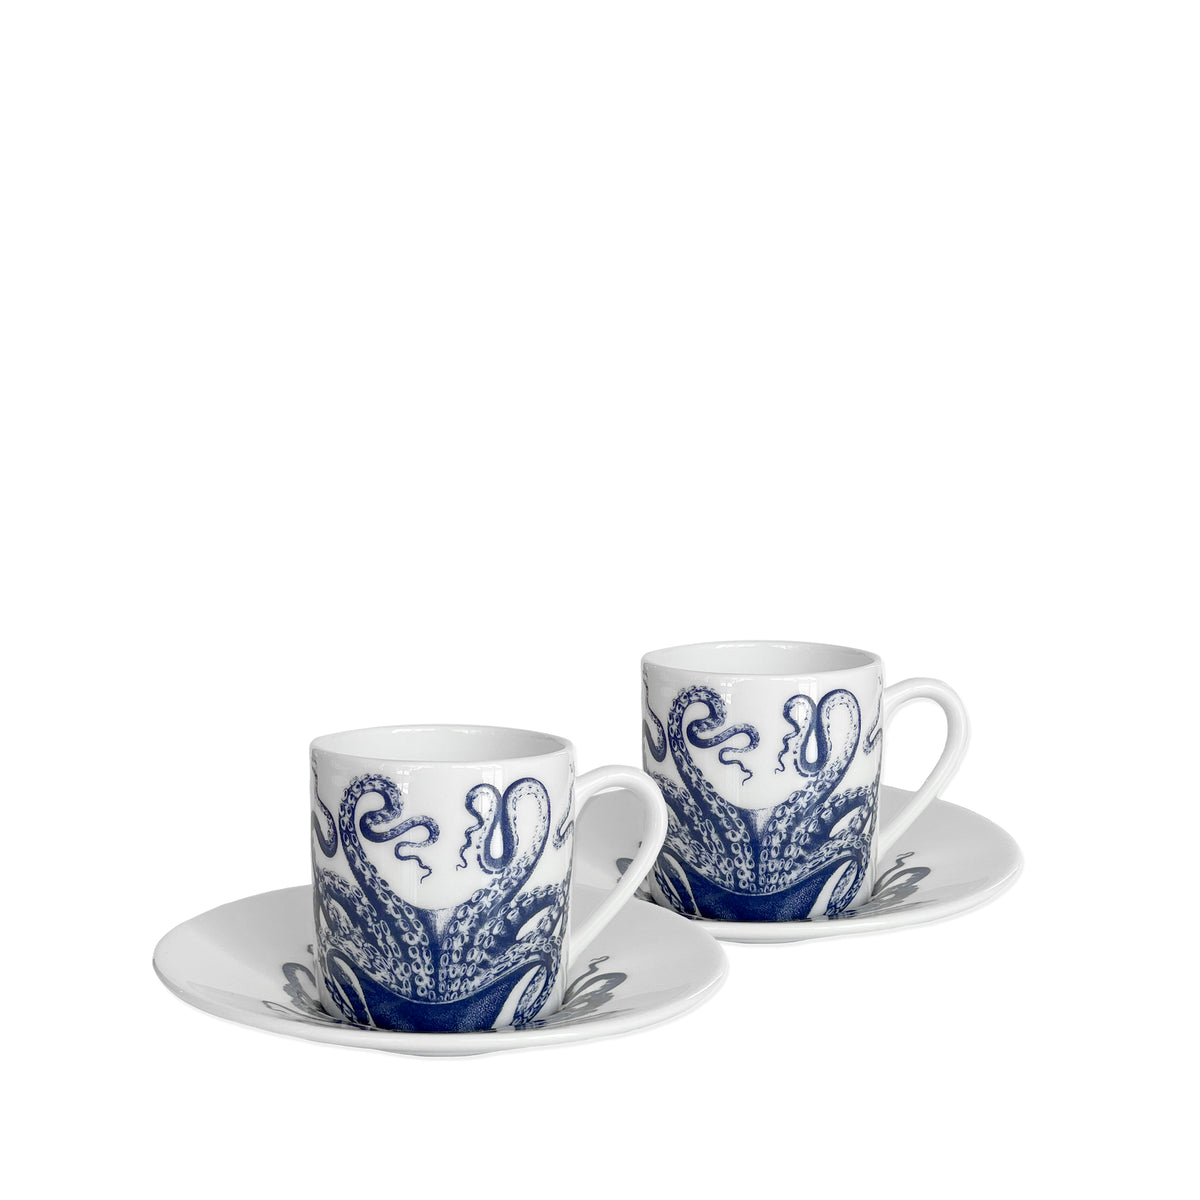 Two white bone china Lucy espresso cups &amp; saucers, set of 2 by Caskata, with blue octopus designs, each placed on matching saucers.